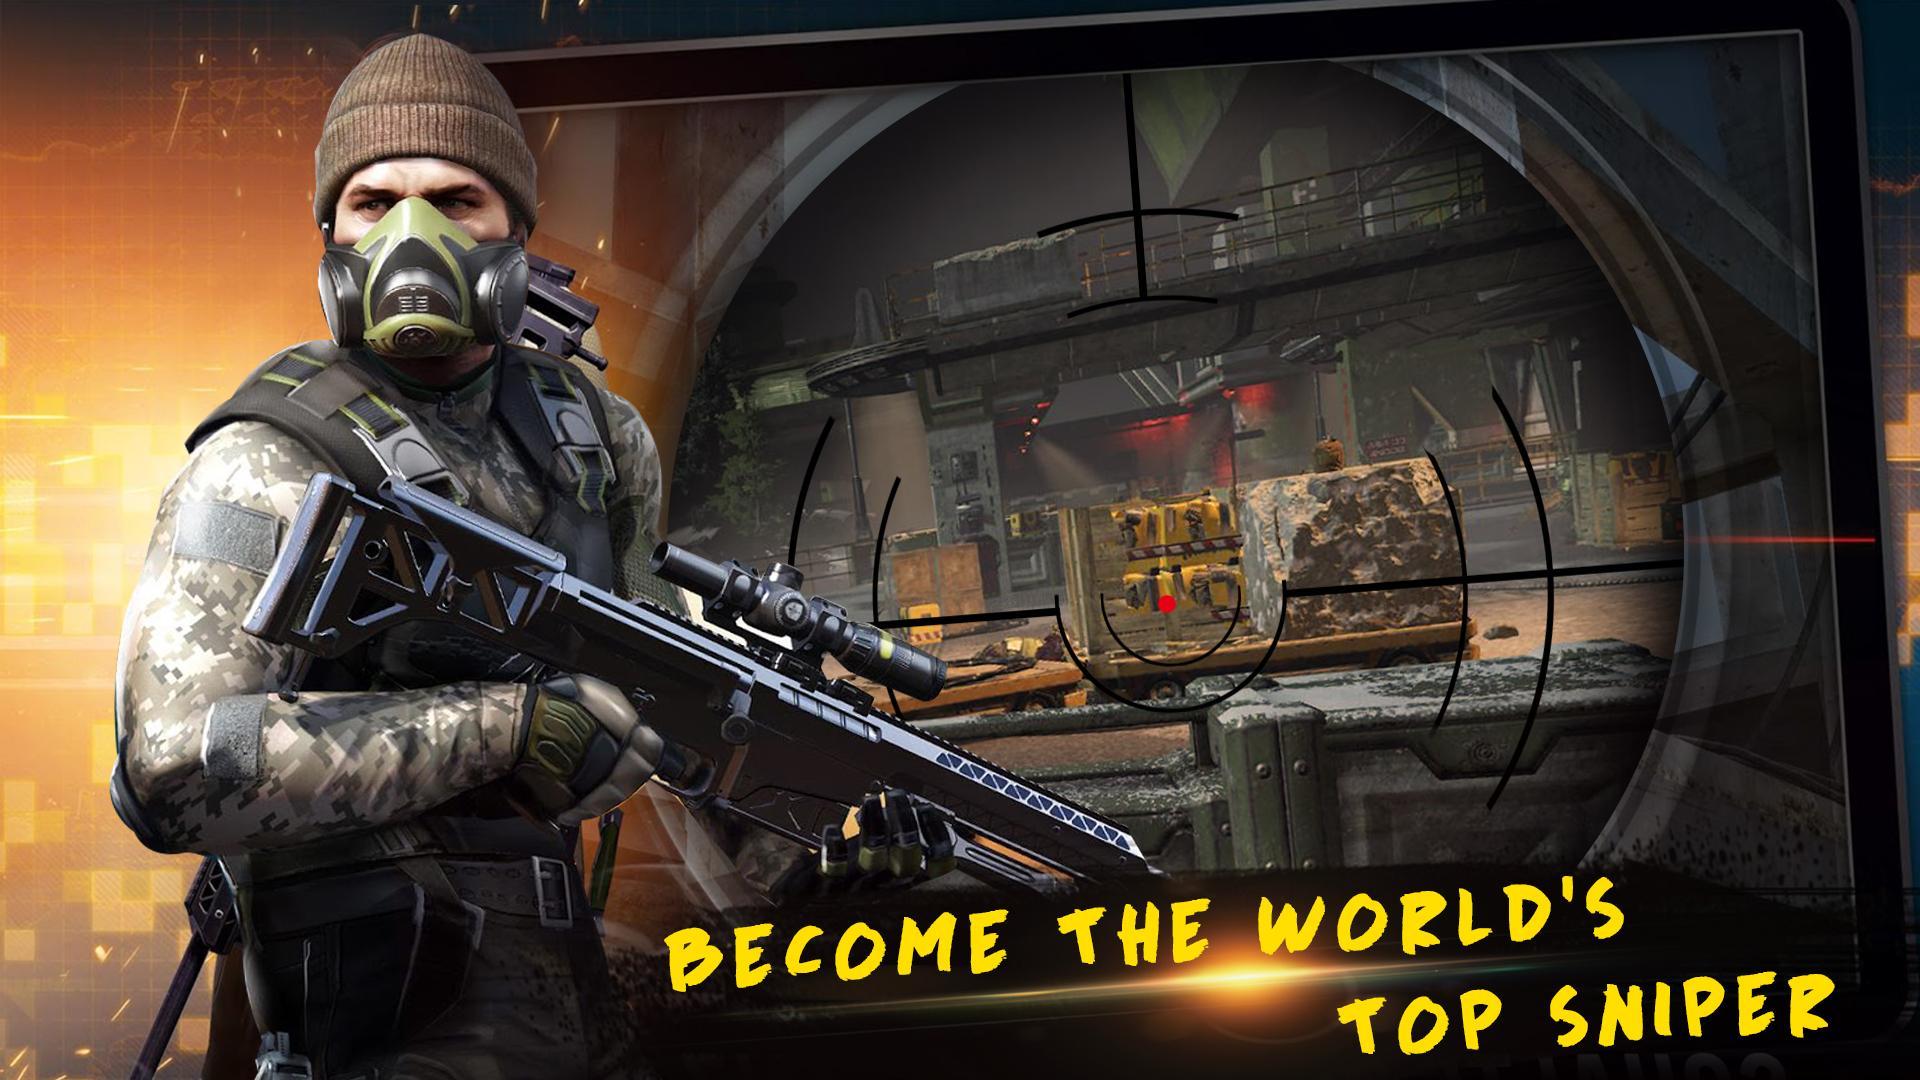 Armed Commando - Free Third Person Shooting Game for Android - APK Download